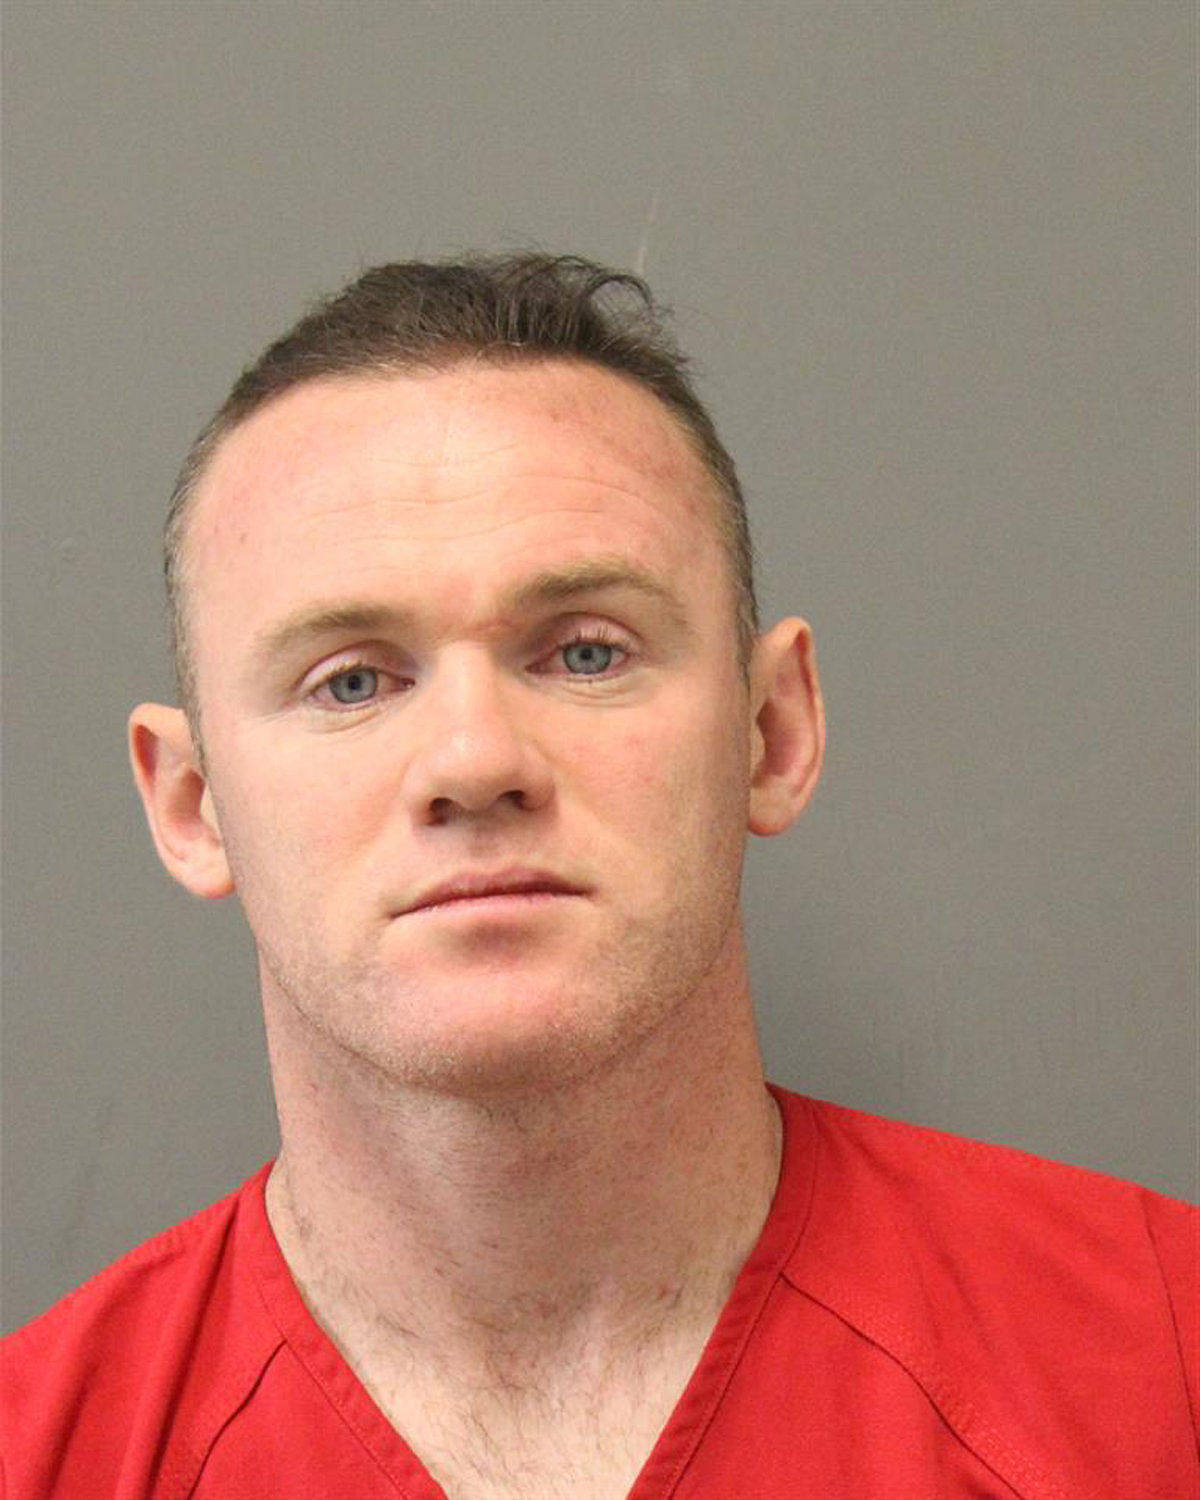 Rooney arrested last month for being drunk